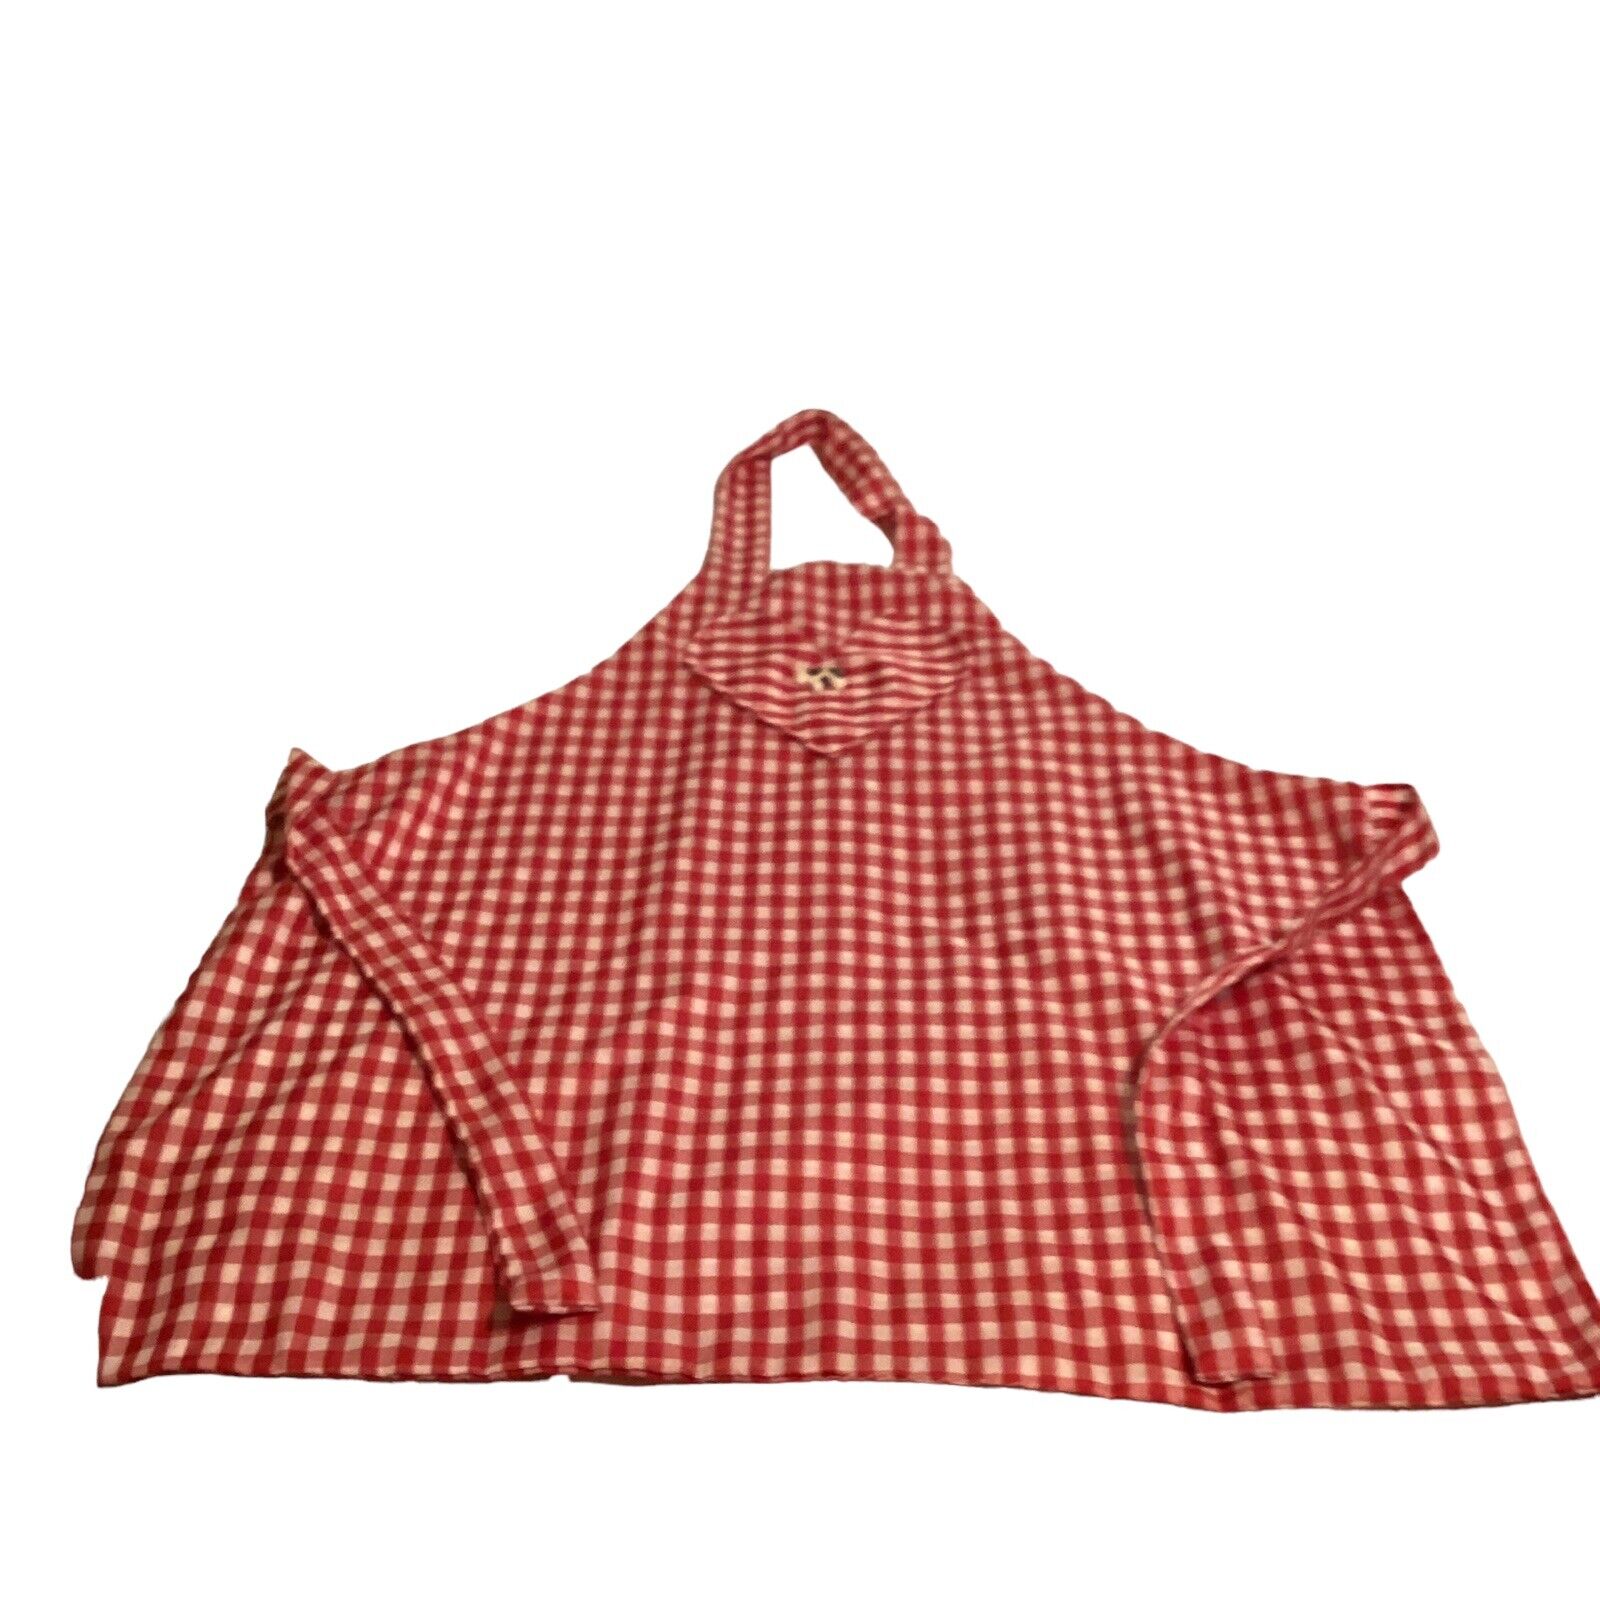 Vintage  Home Made Full Apron Red And White Gingham With Pocket